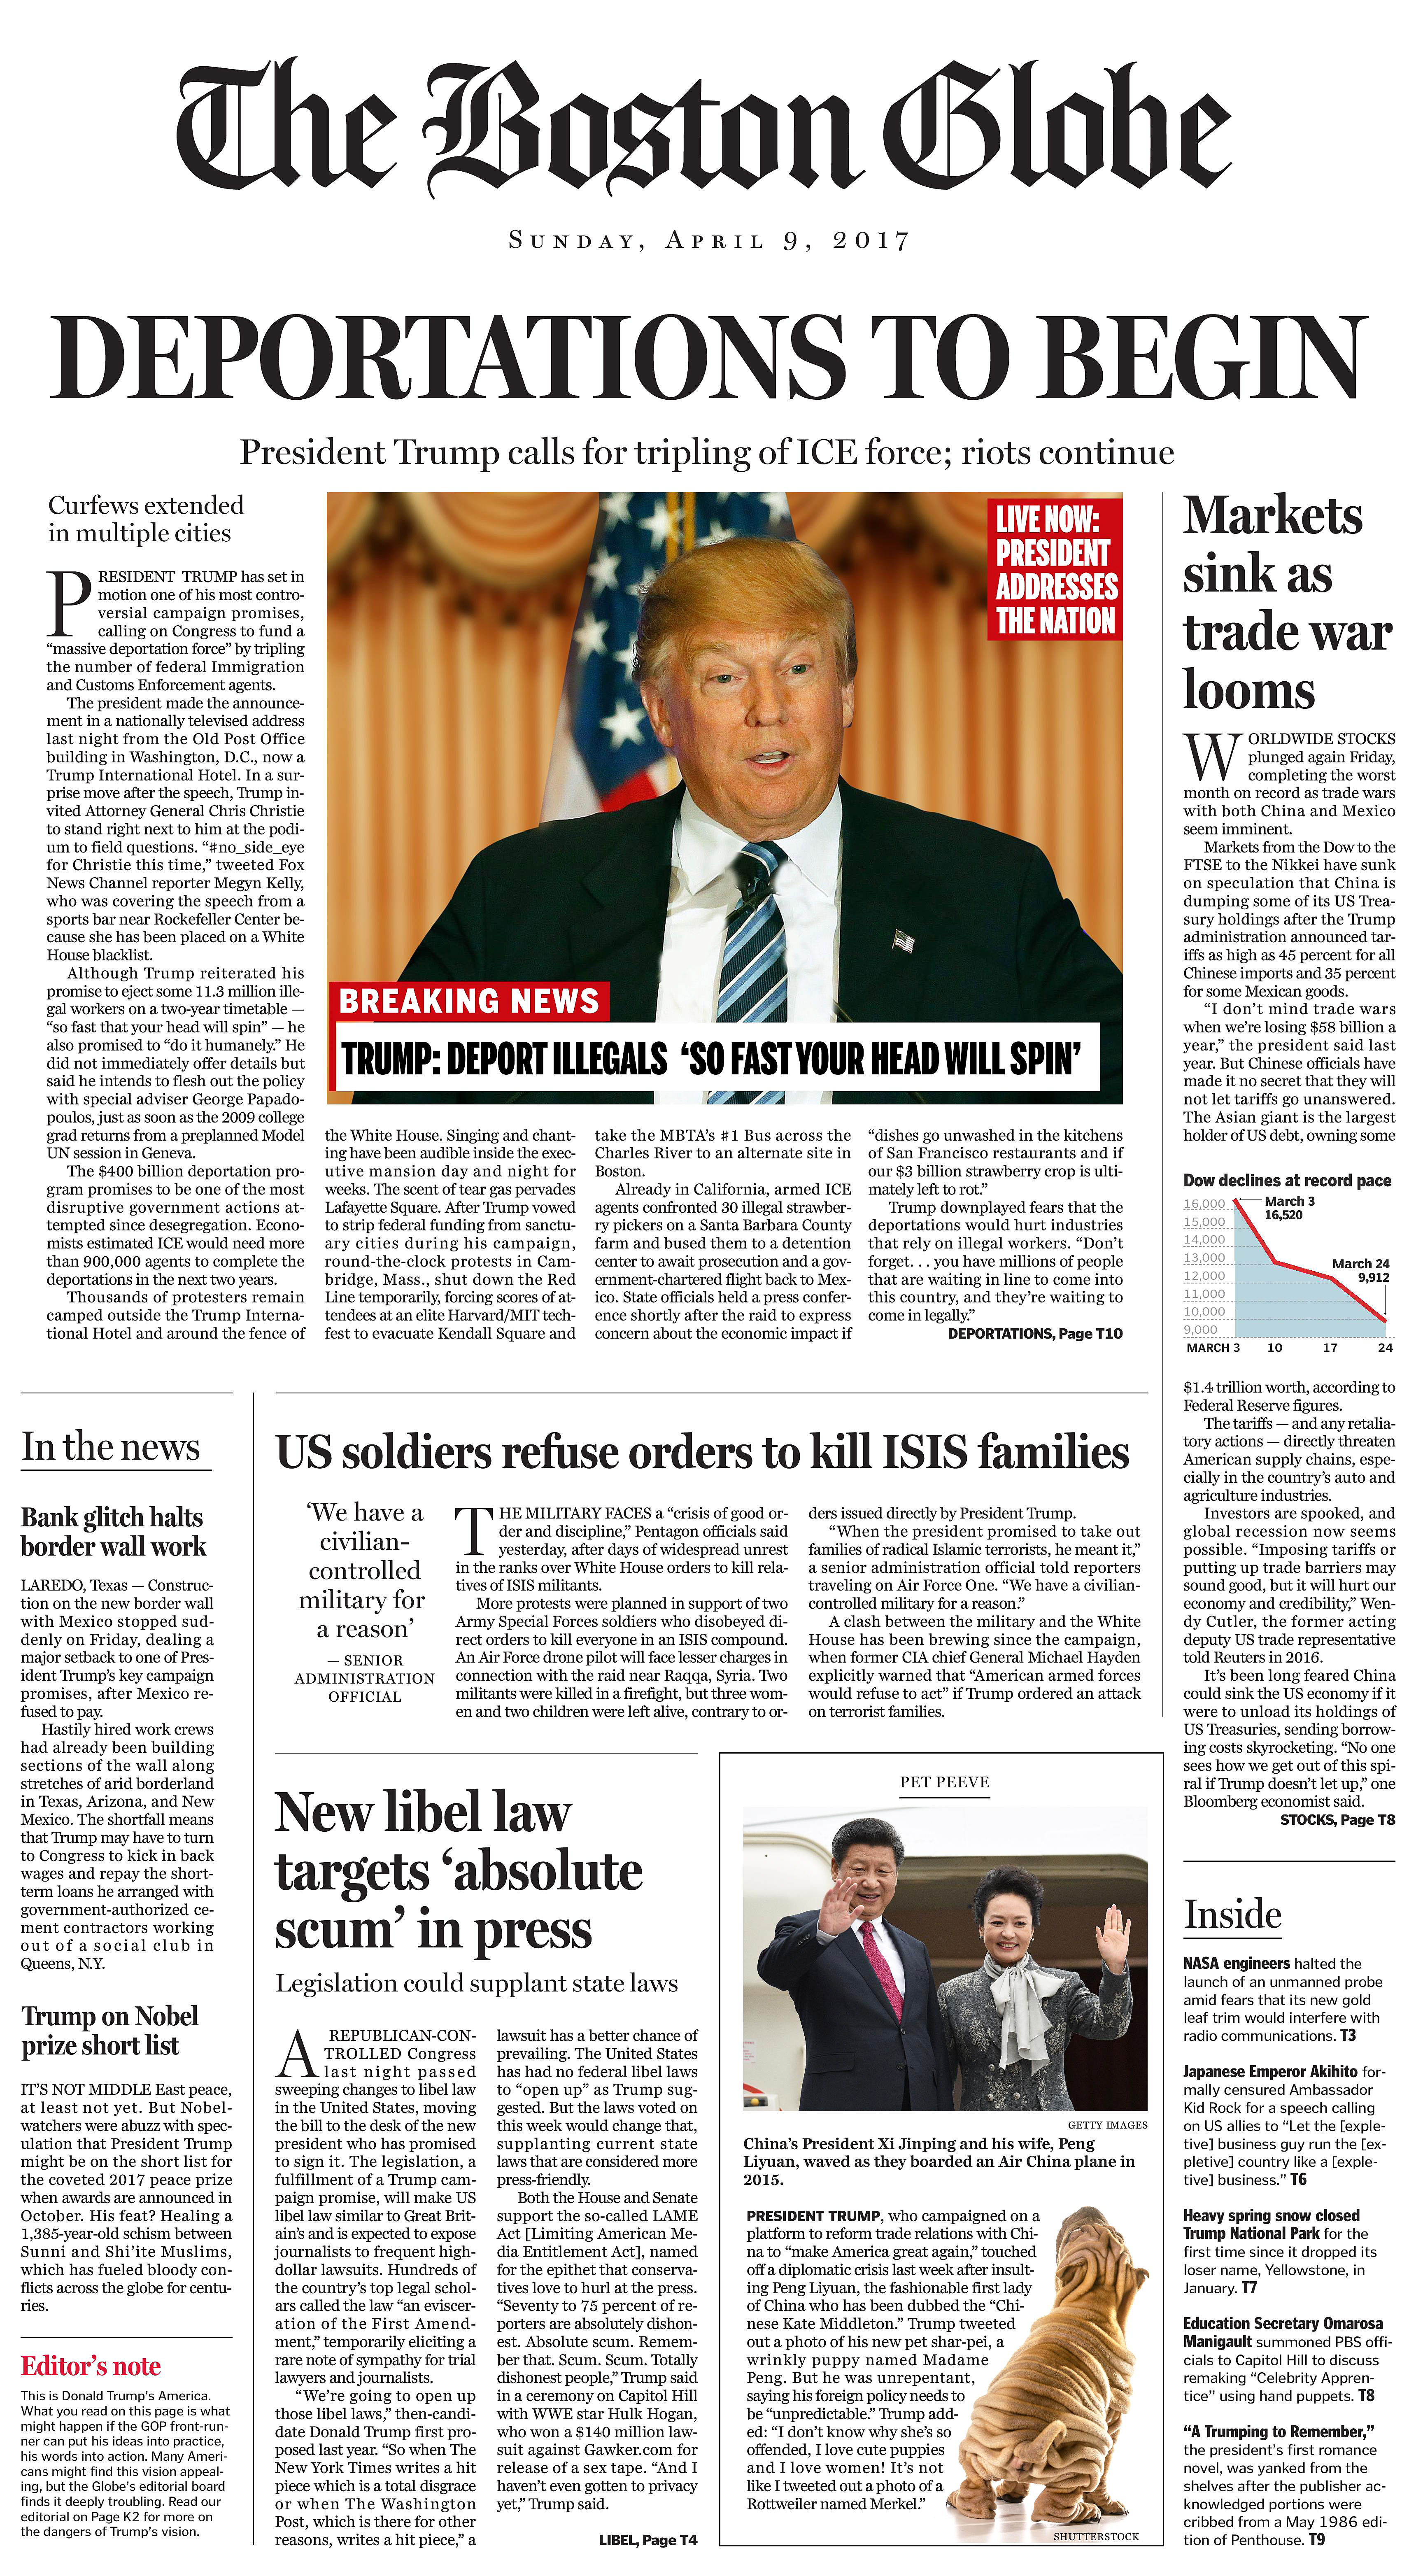 The Boston Globe's satirical front page about what a Donald Trump presidency would look like. 